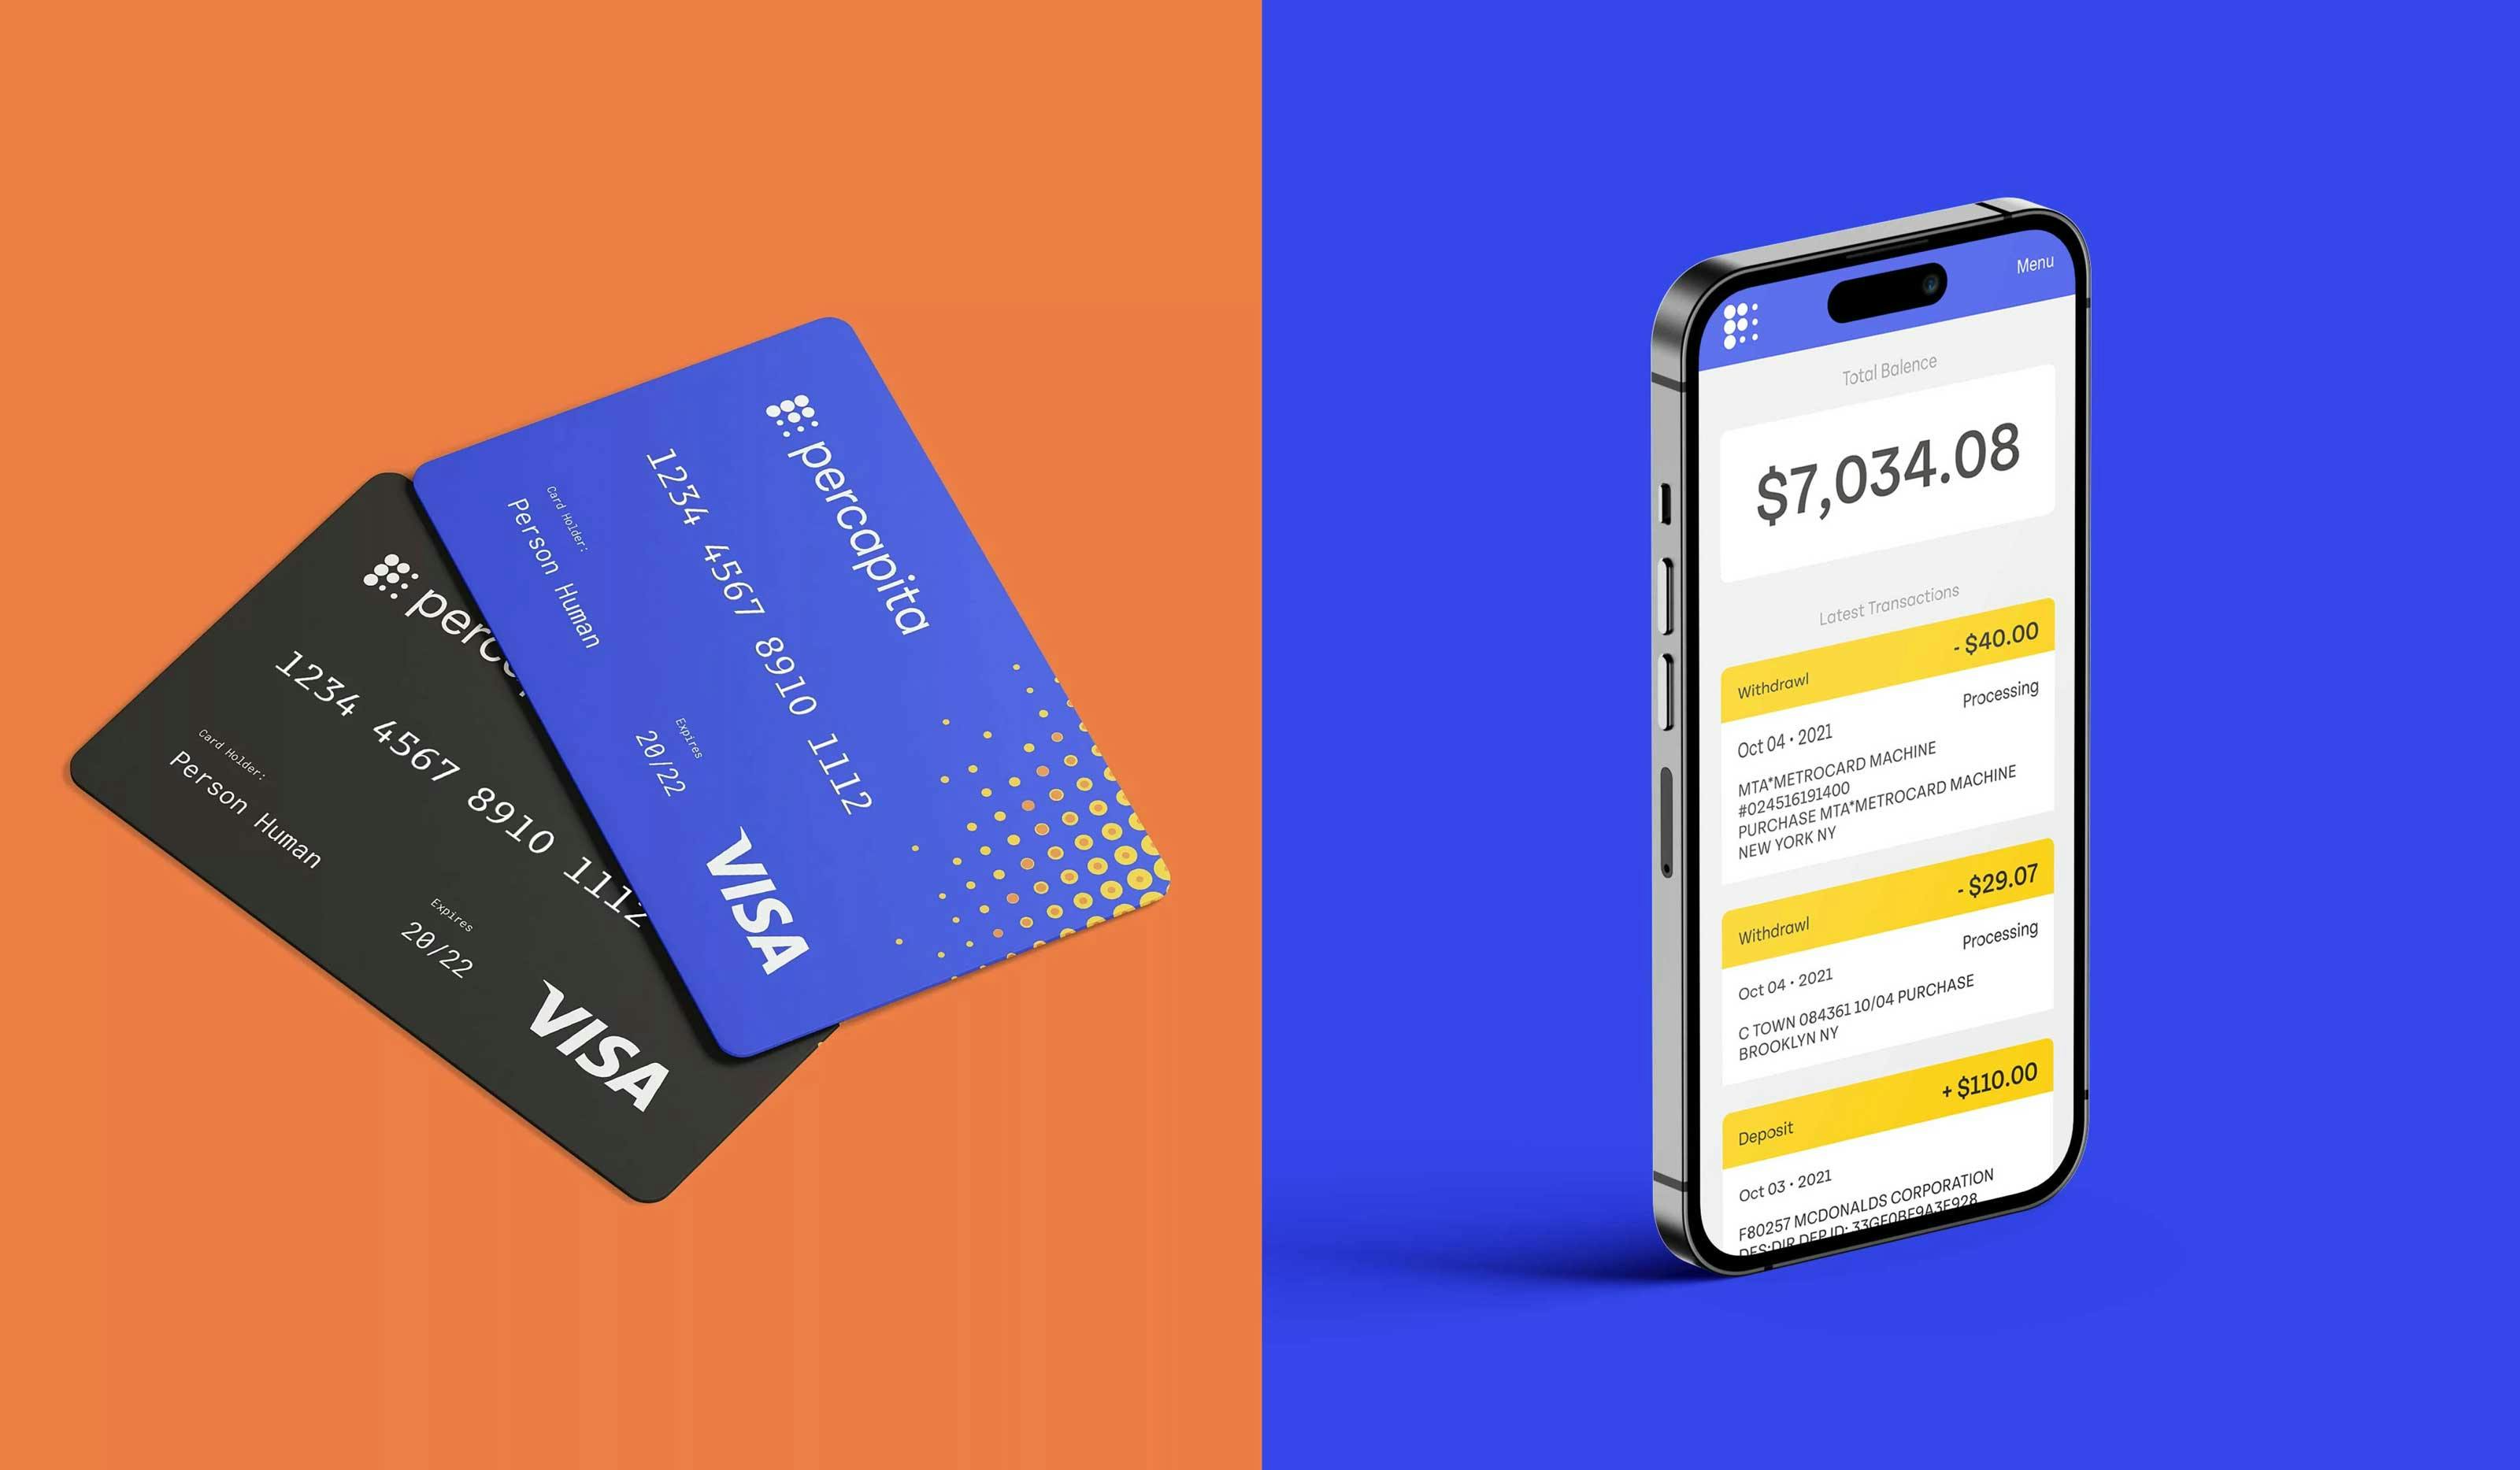 Credit-cards-and-iPhone-app-screen-for-a-bank.jpg